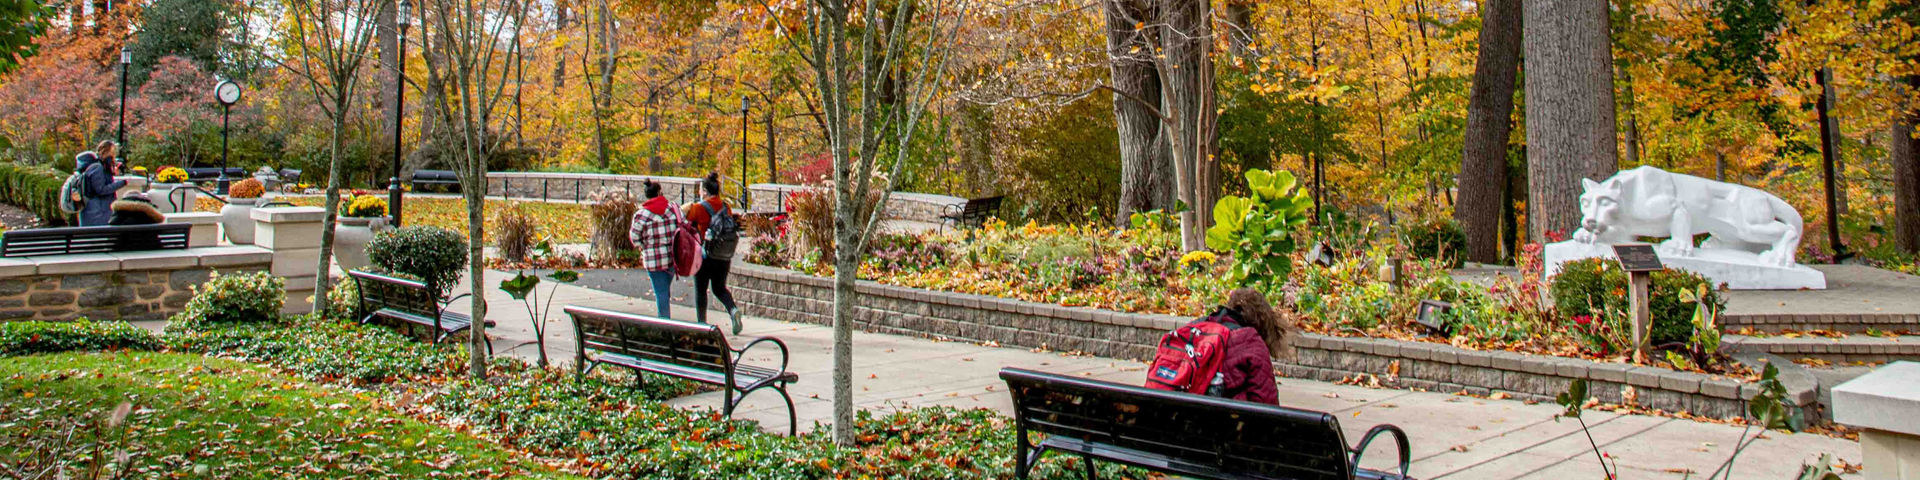 Sutherland Plaza during fall and students walking